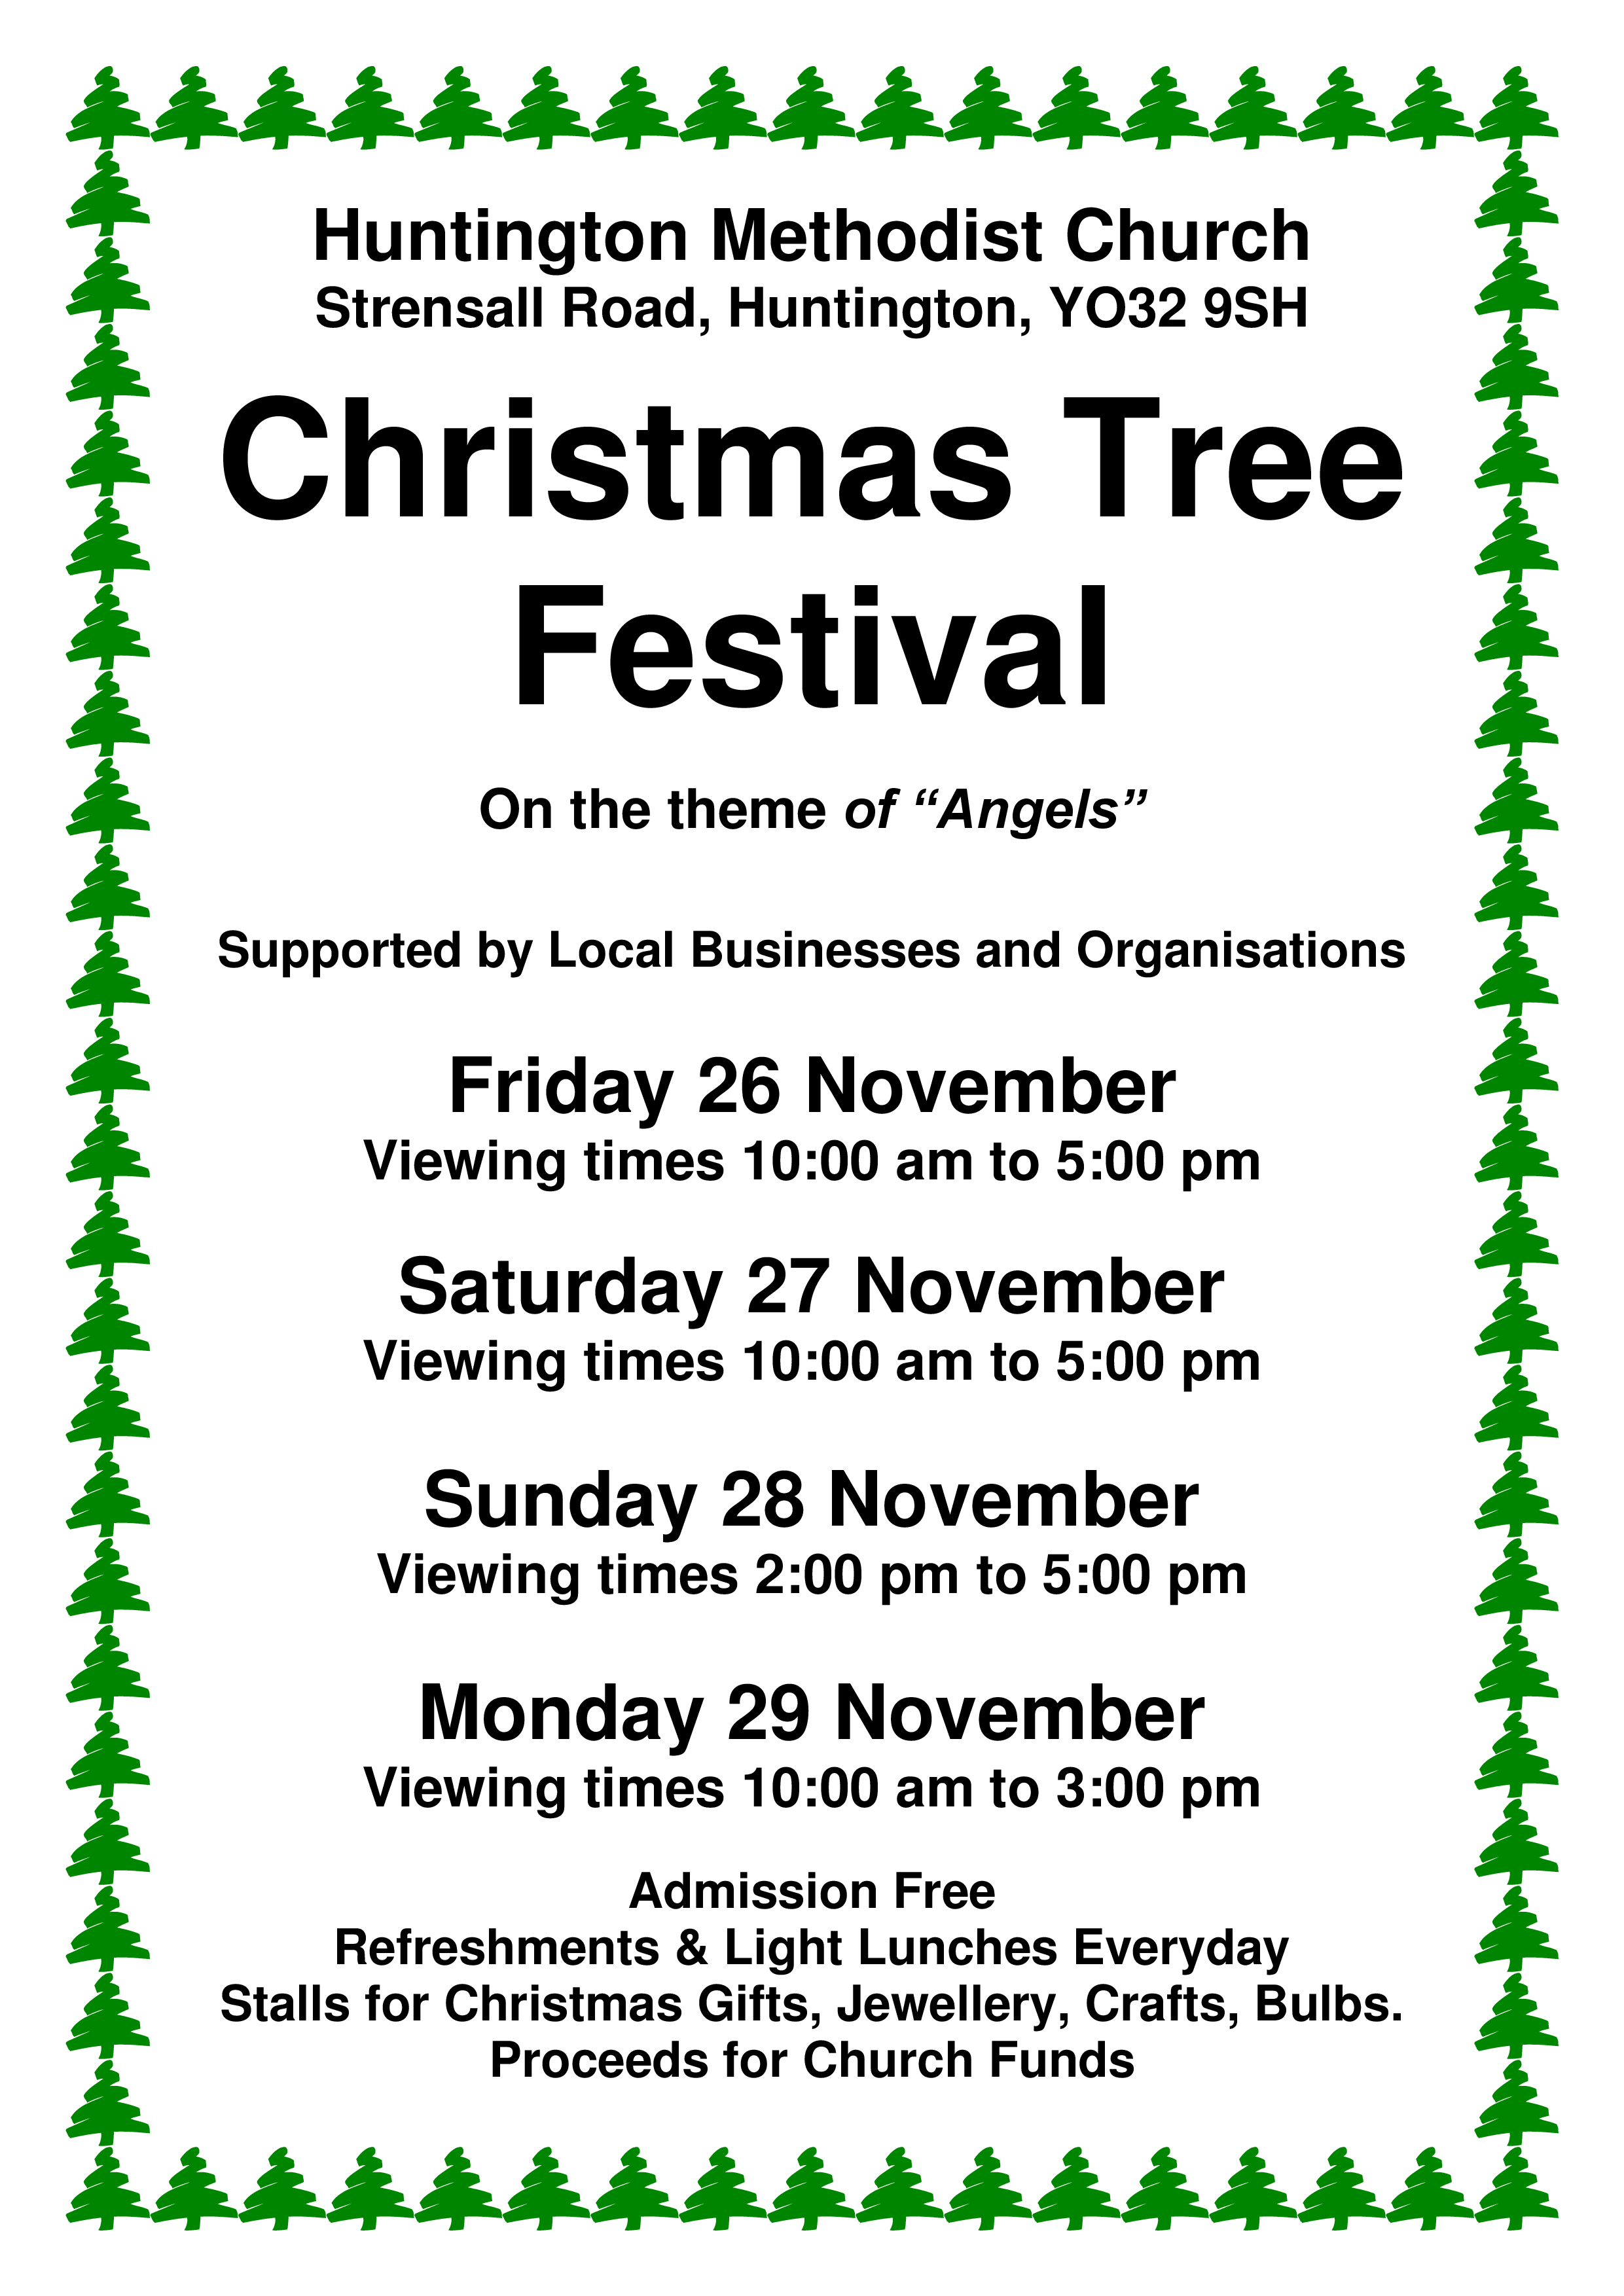 Christmas Tree Festival On the theme of “Angels” Supported by Local Businesses and Organisations Friday 26 November Viewing times 10:00 am to 5:00 pm Saturday 27 November Viewing times 10:00 am to 5:00 pm Sunday 28 November Viewing times 2:00 pm to 5:00 pm Monday 29 November Viewing times 10:00 am to 3:00 pm Admission Free Refreshments & Light Lunches Everyday Stalls for Christmas Gifts, Jewellery, Crafts, Bulbs. Proceeds for Church Funds